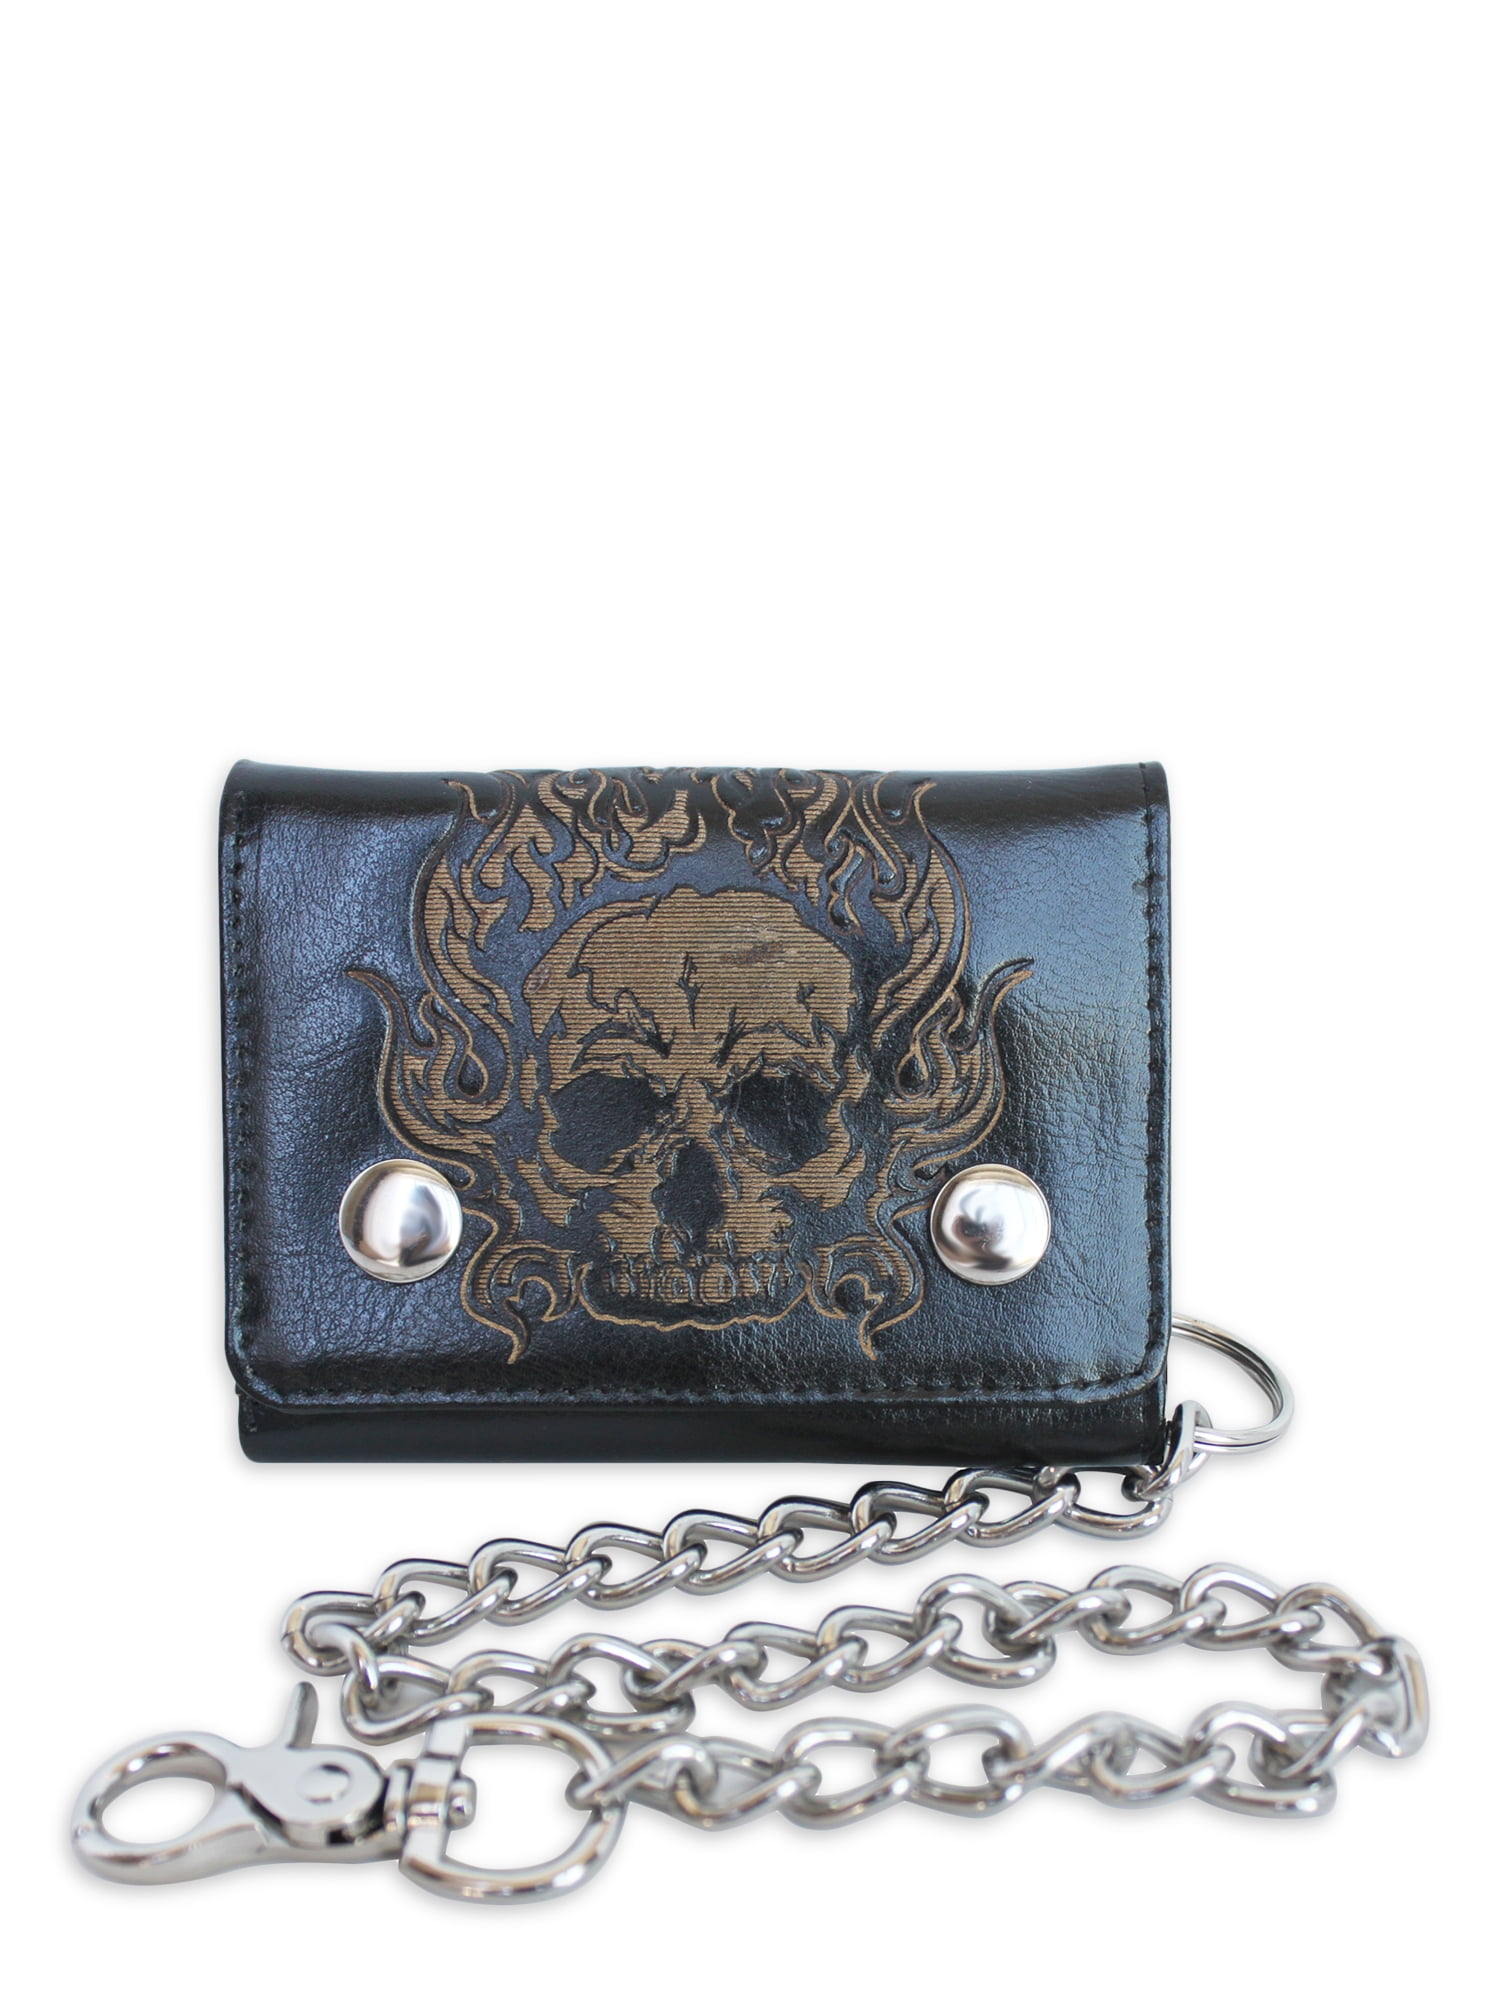 Punisher Metal Badge Trifold Chain Wallet